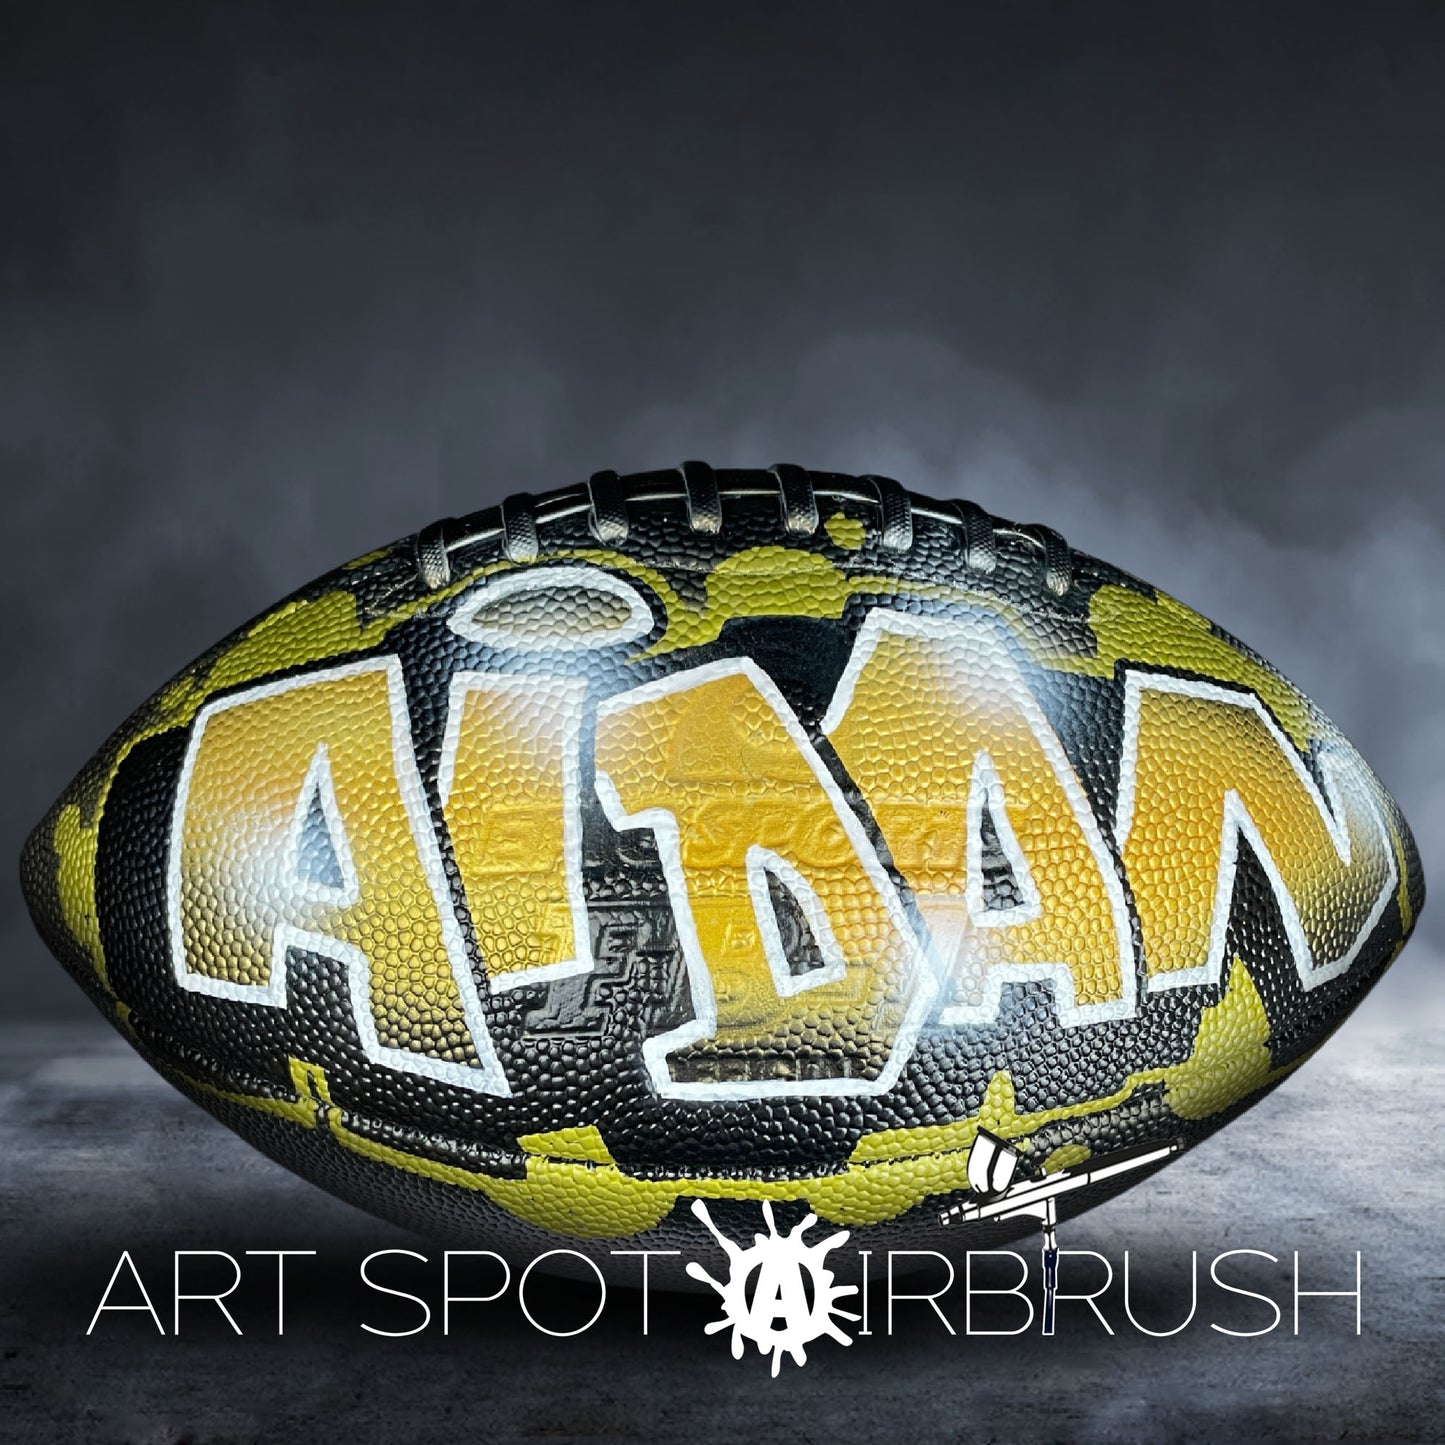 Football Customized with Name in Graffiti